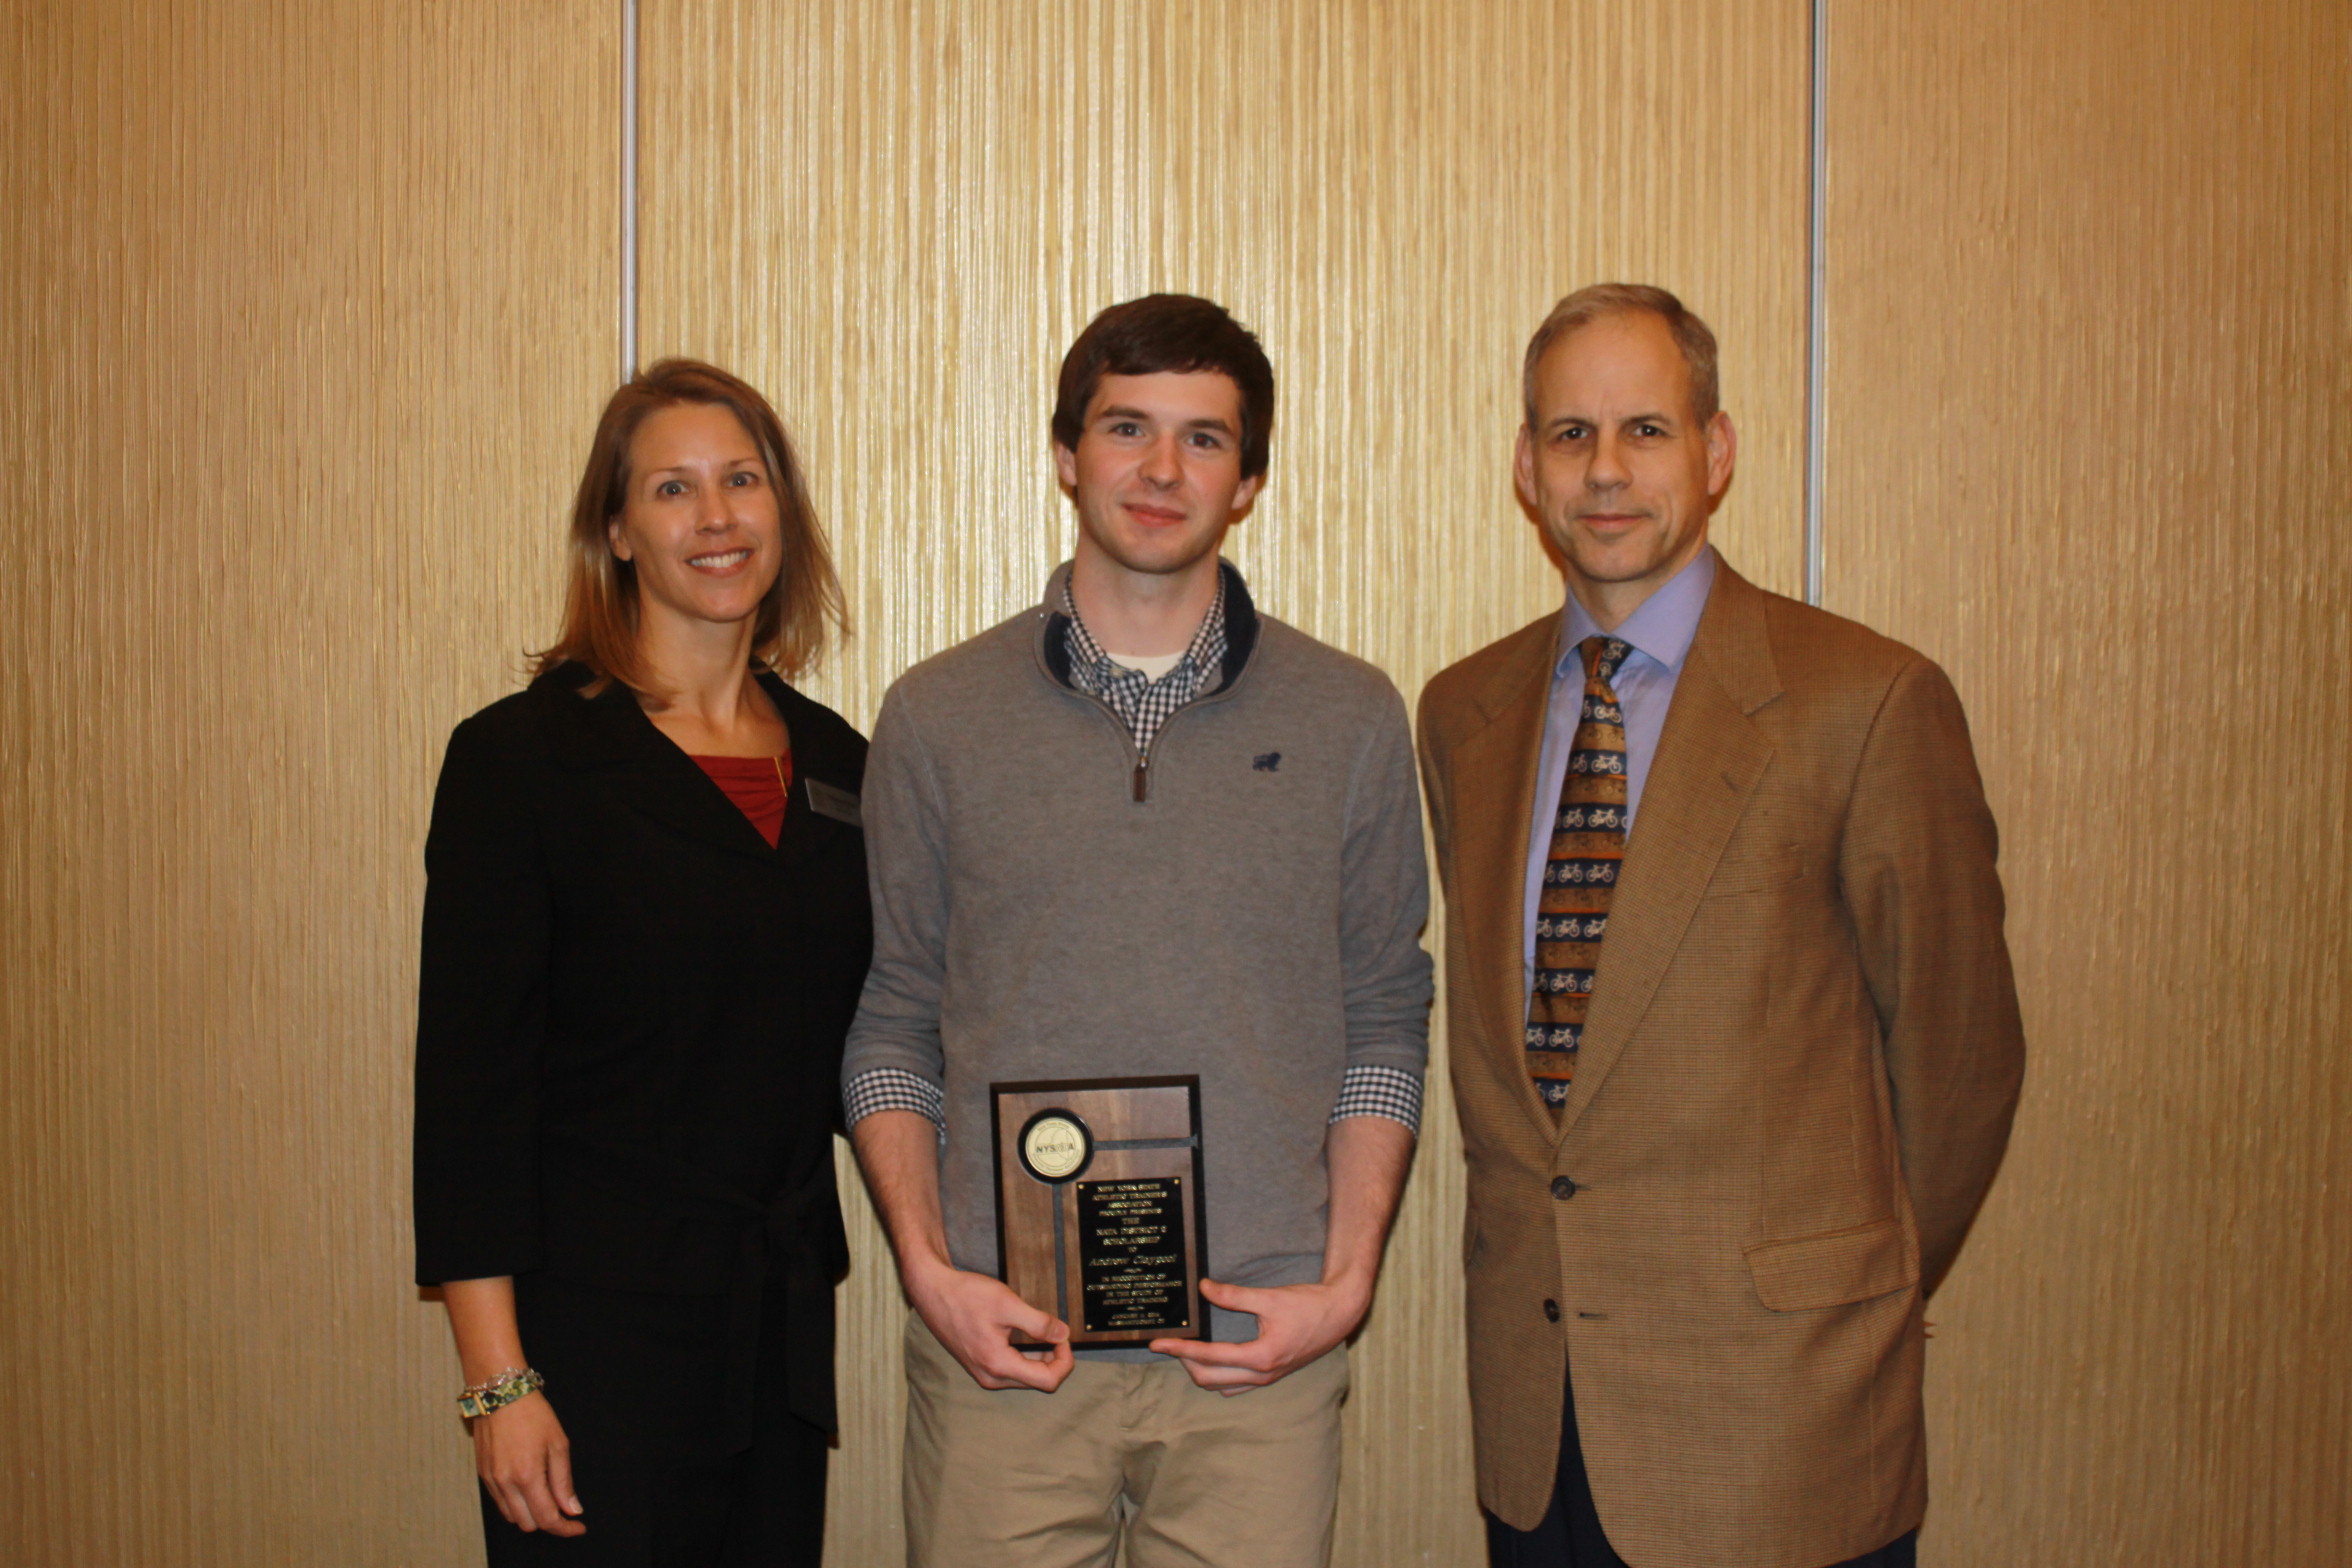 The recipient of the NATA District 2 Scholarship for NYS was Andrew Claypool of Ithaca College (center).